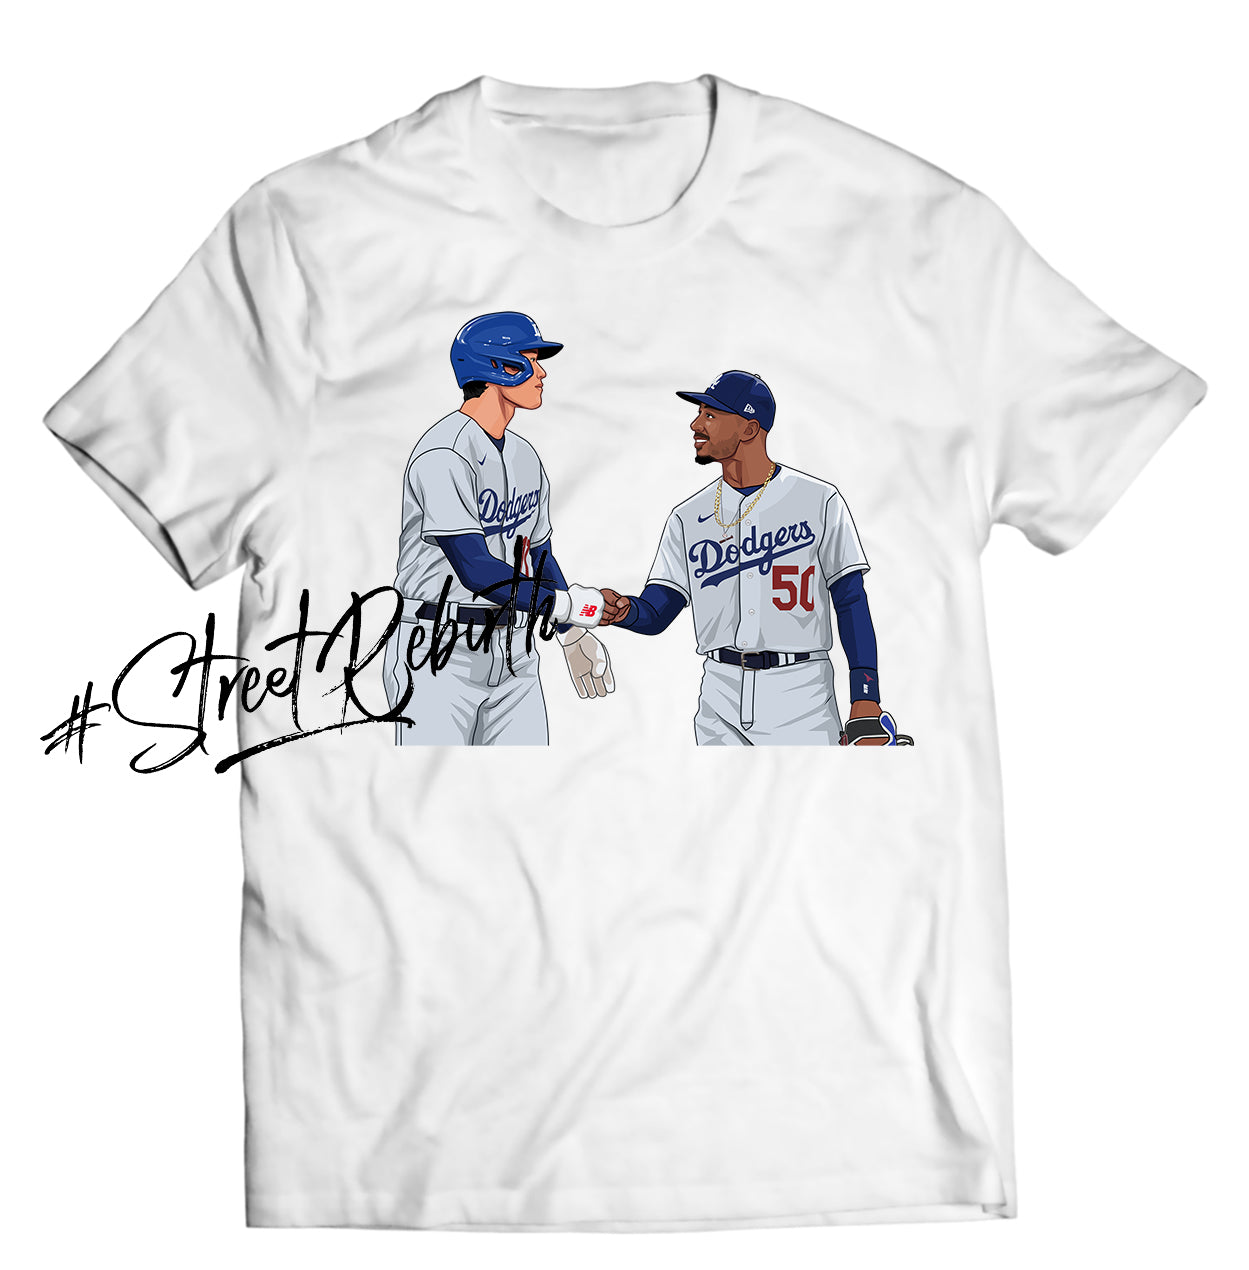 Shohei Ohtani Celebratory Fist Pump with Mookie Betts - Dodgers Signing Moment - Direct To Garment Quality Print - Unisex Shirt - Gift For Him or Hert